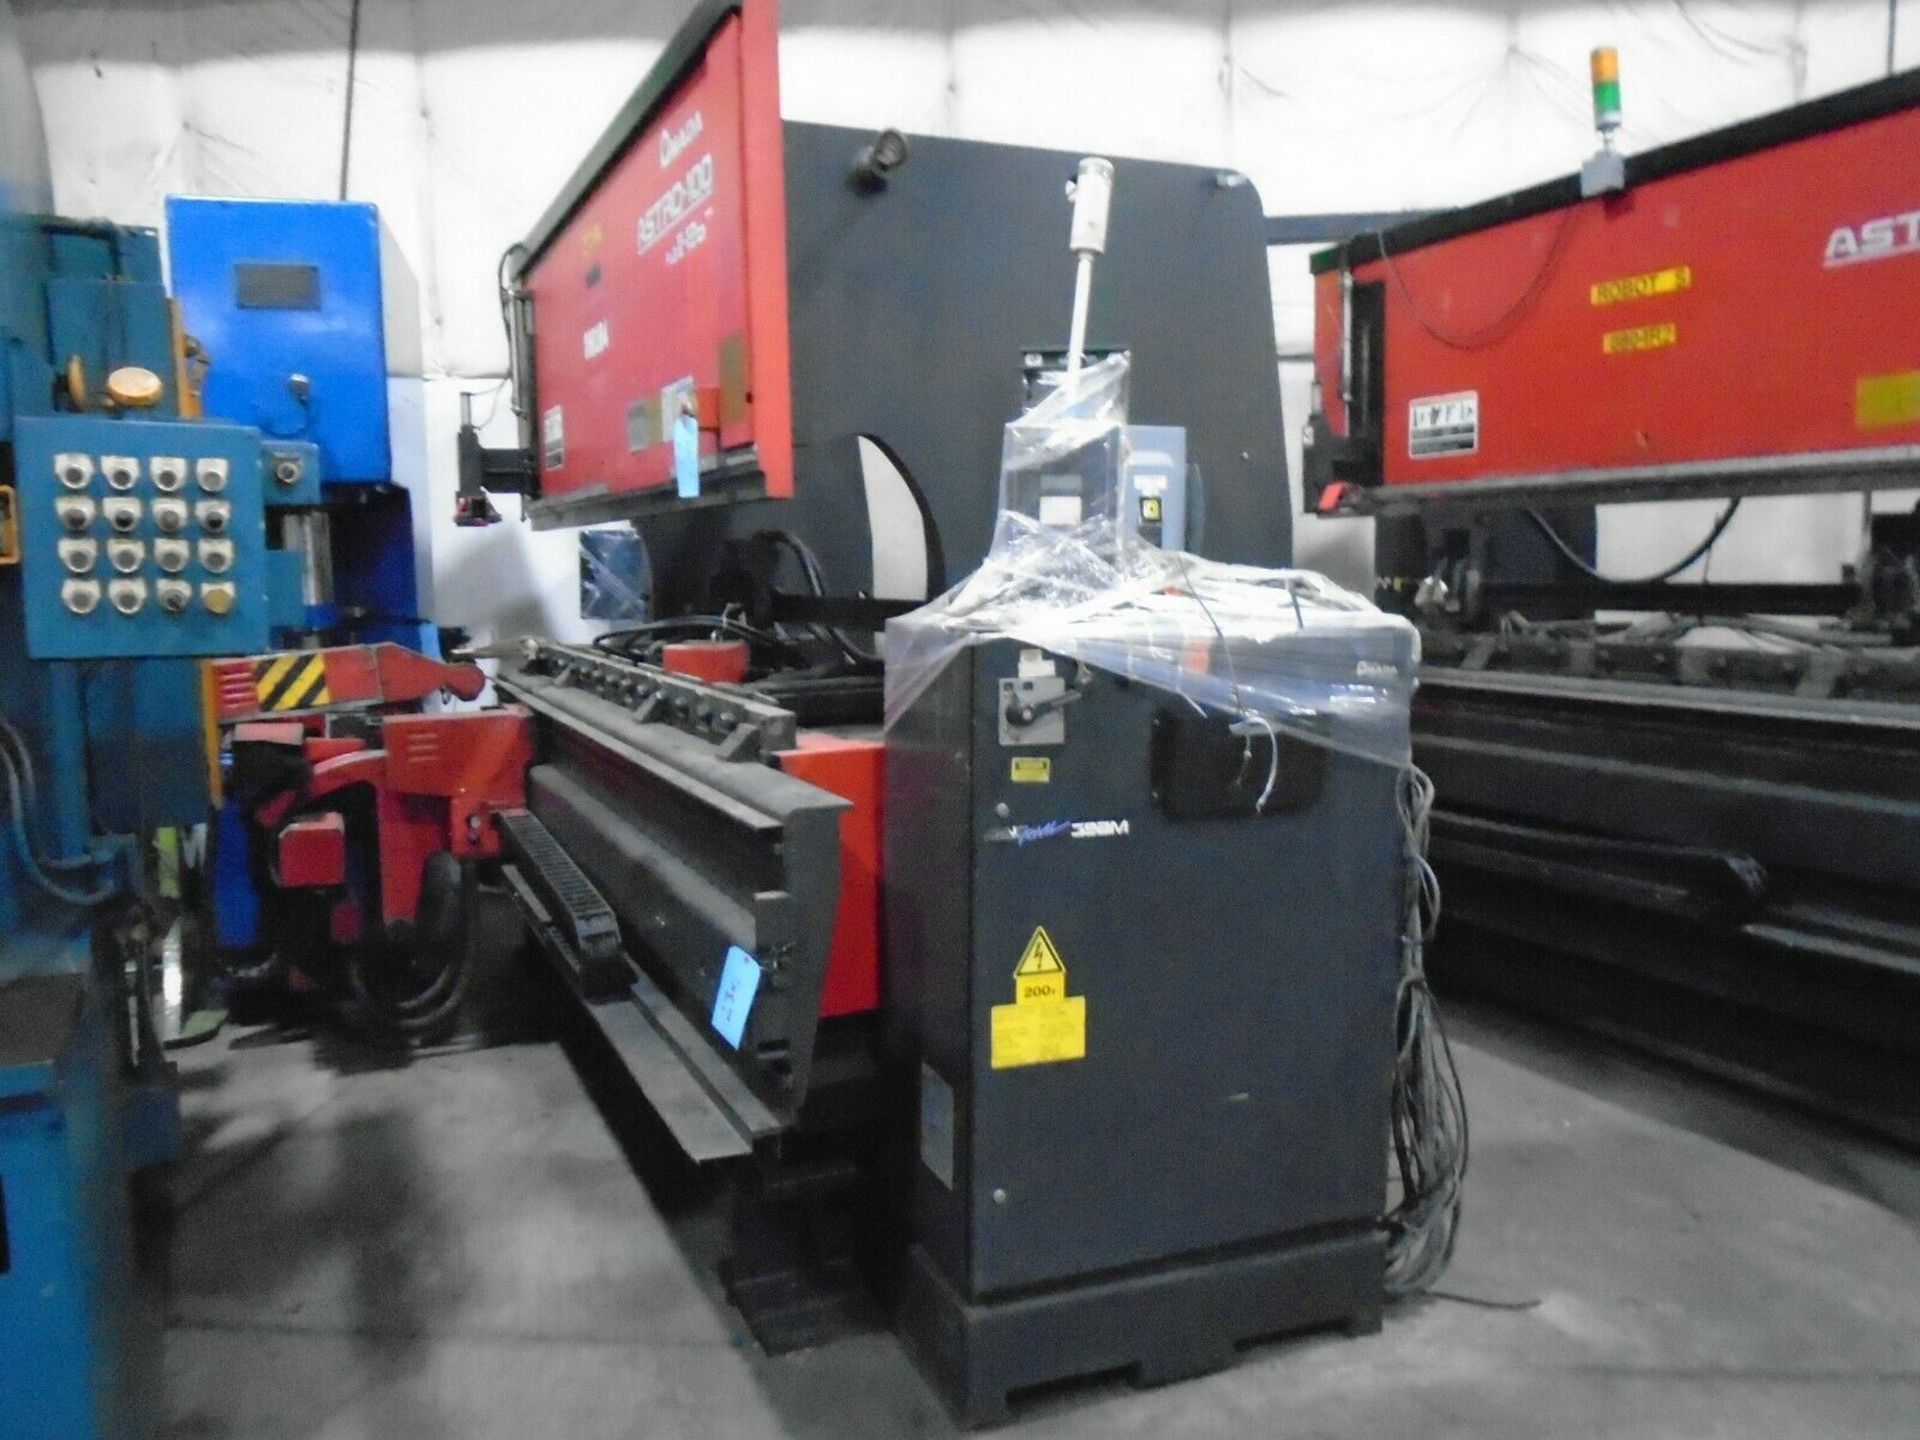 Amada Astro FBD 1253 MH CNC Press Brake Bending Cell 125 Tons x 10’ Year 1997